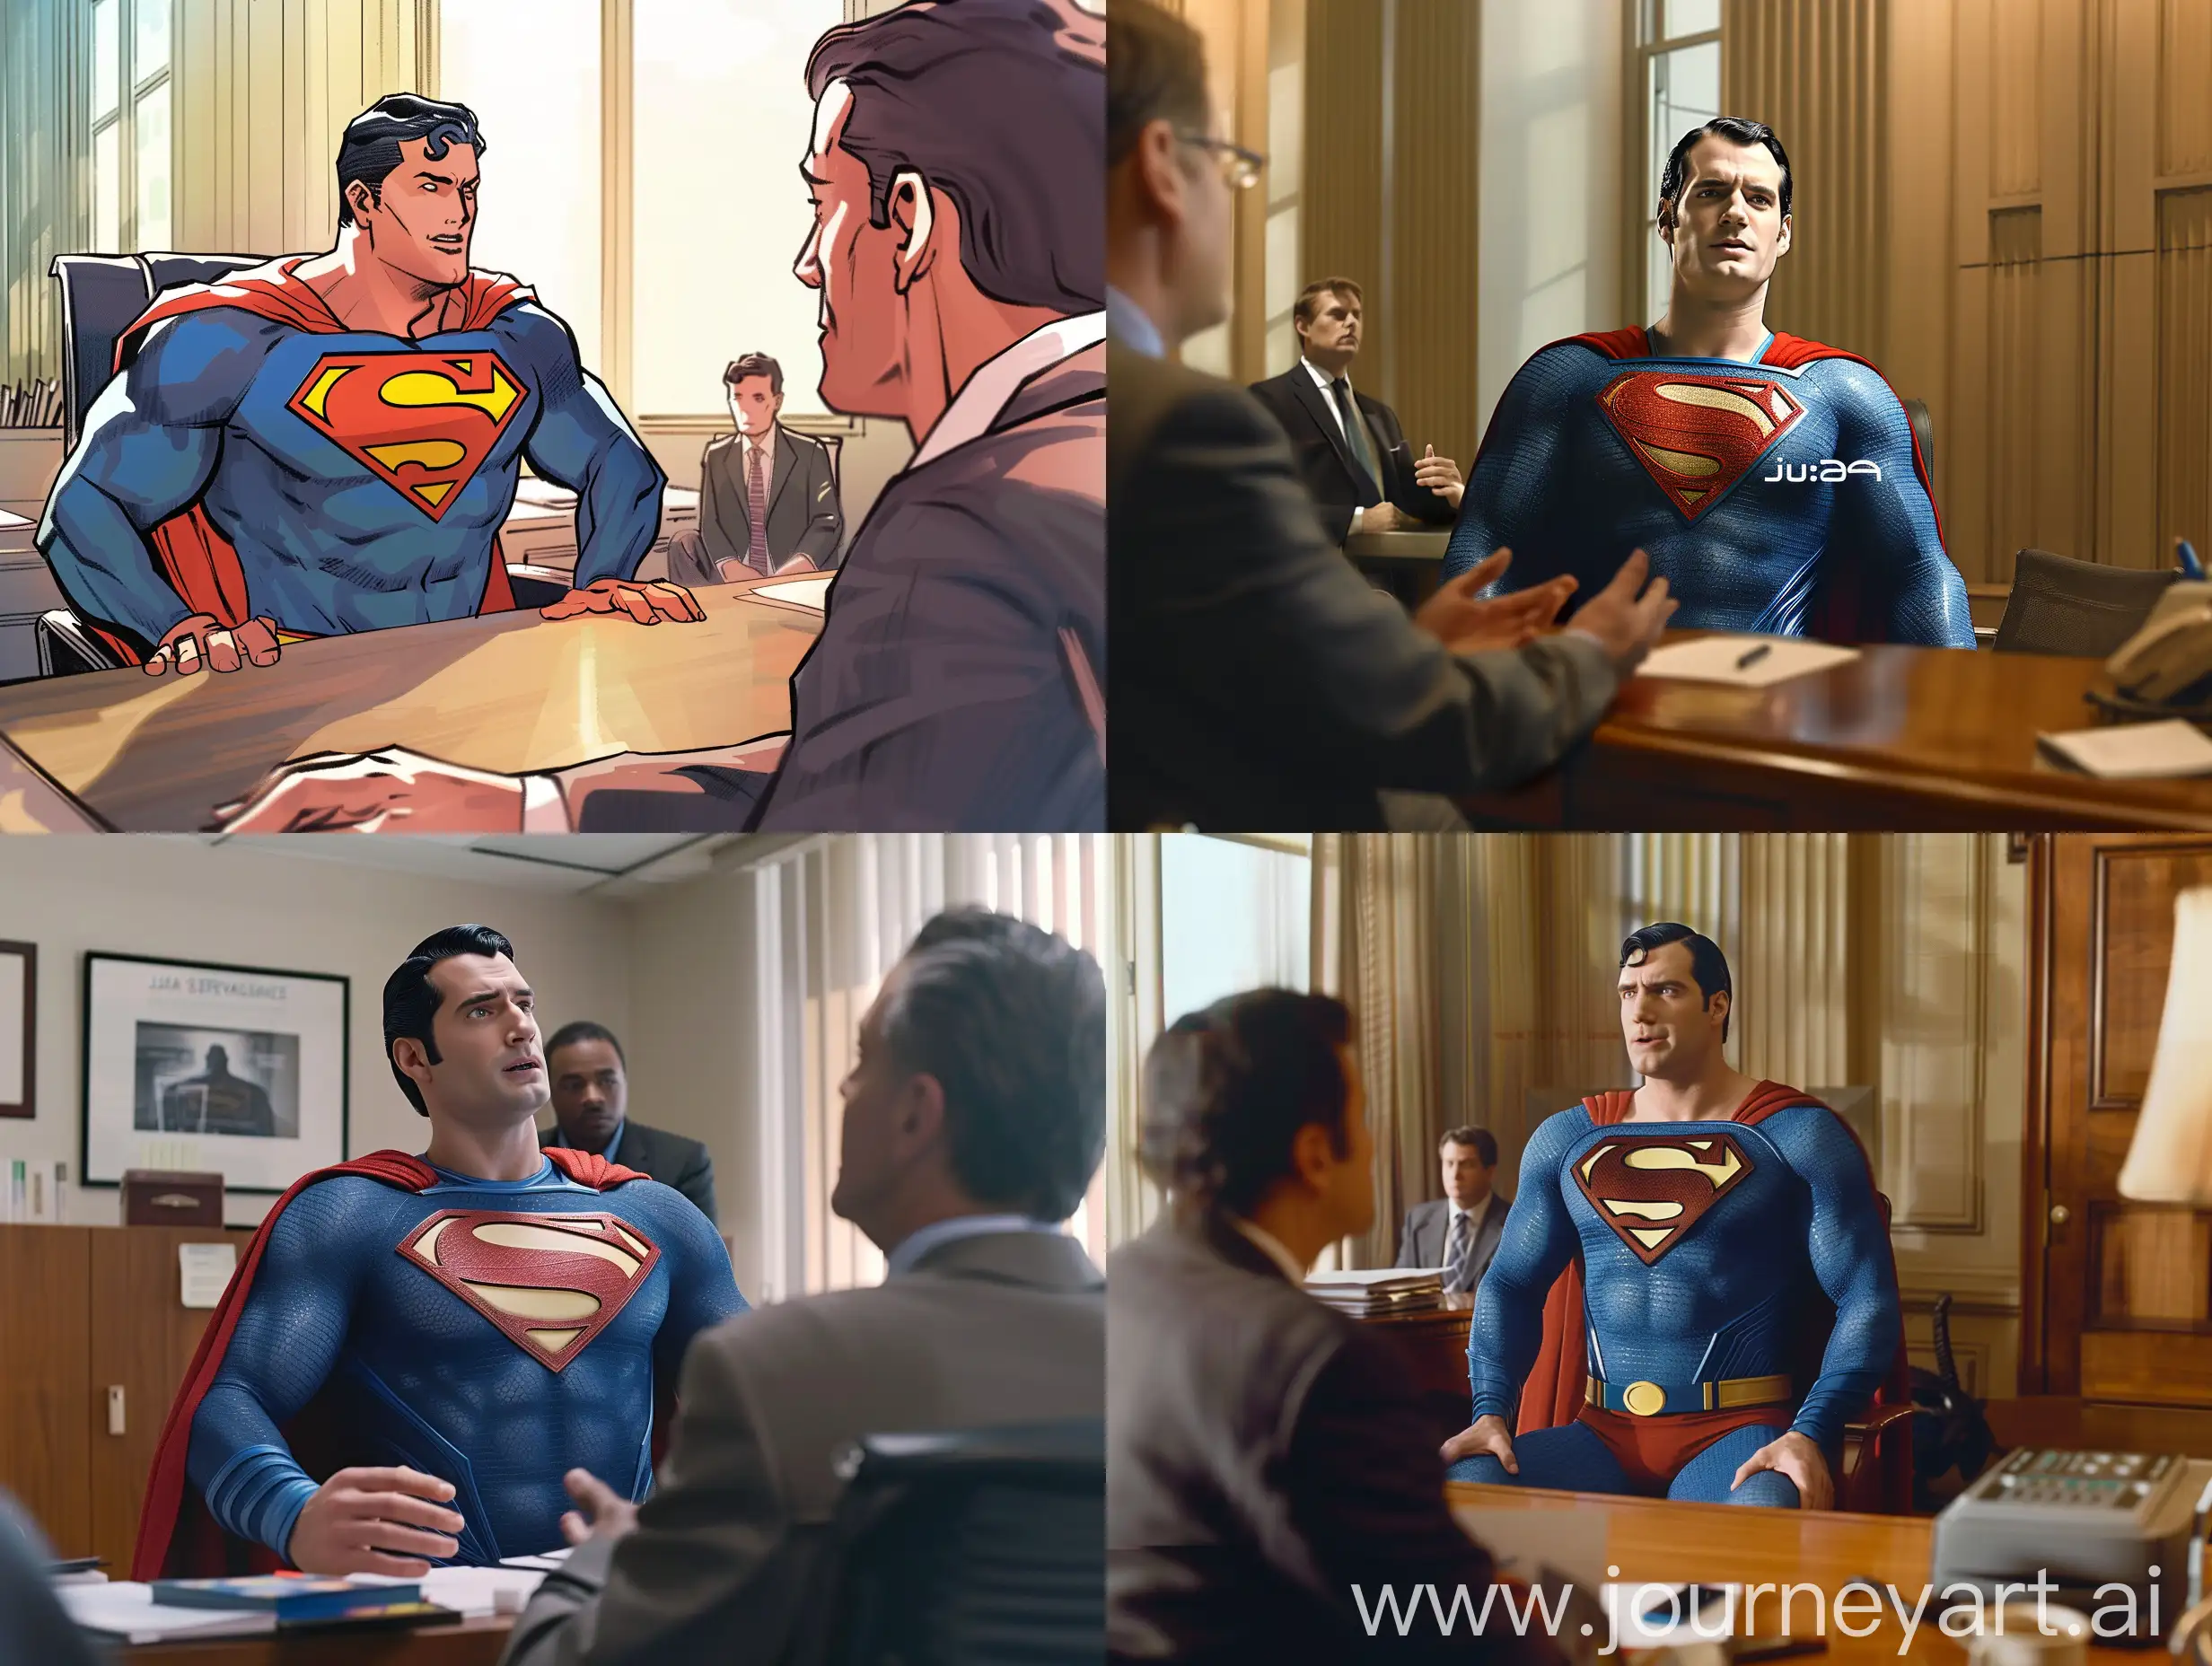 Superman-Discusses-Jira-Service-Management-in-Office-Setting